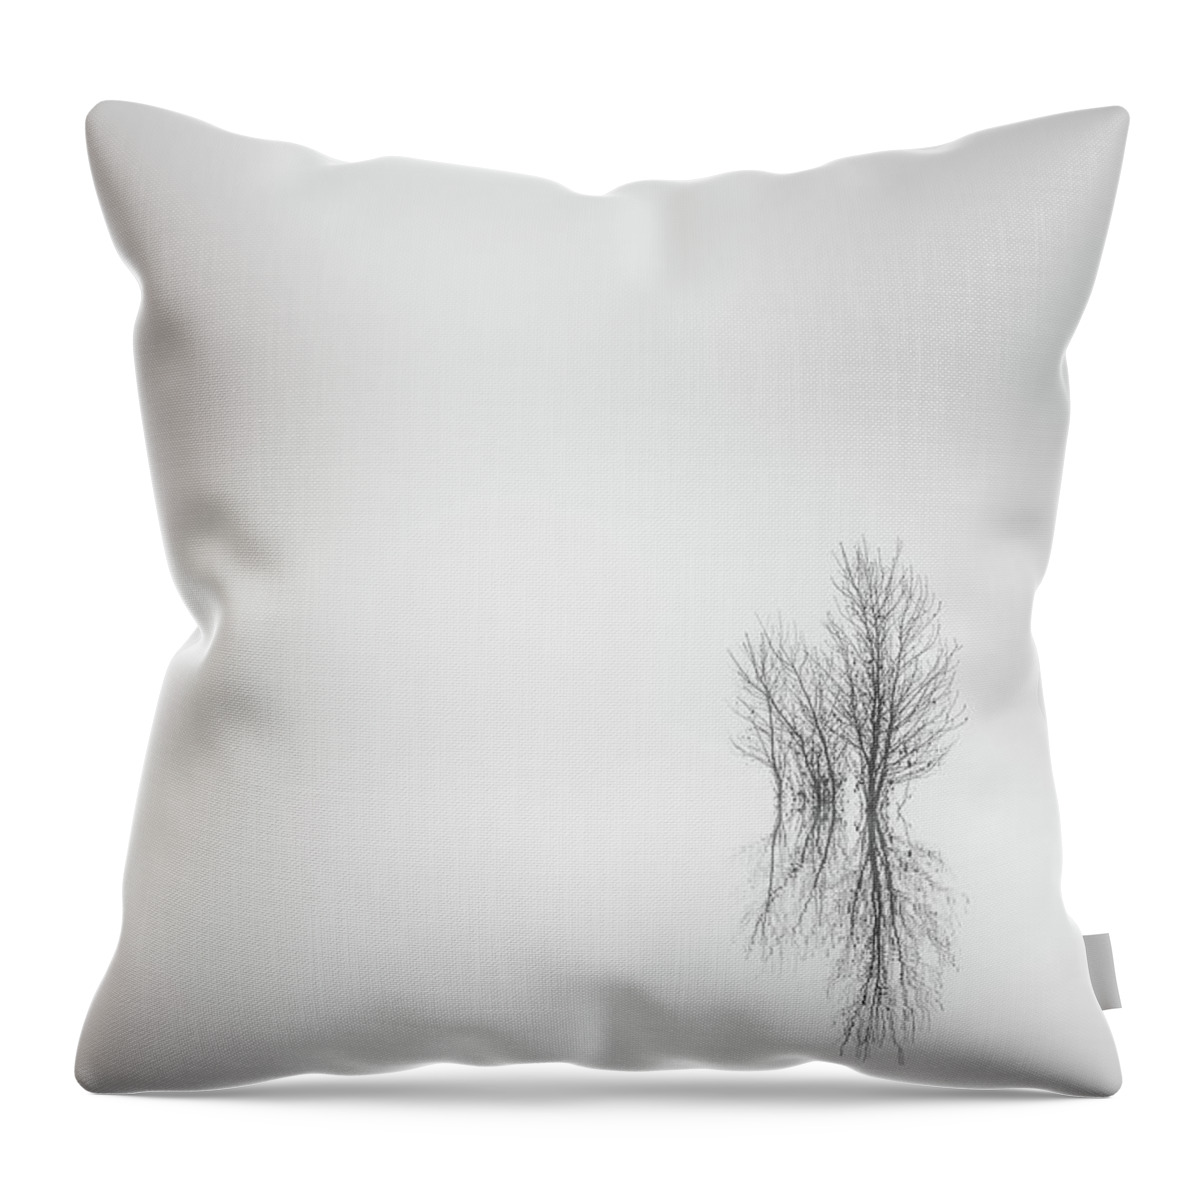 Columbia River Throw Pillow featuring the photograph Misty Simplicity by Don Schwartz